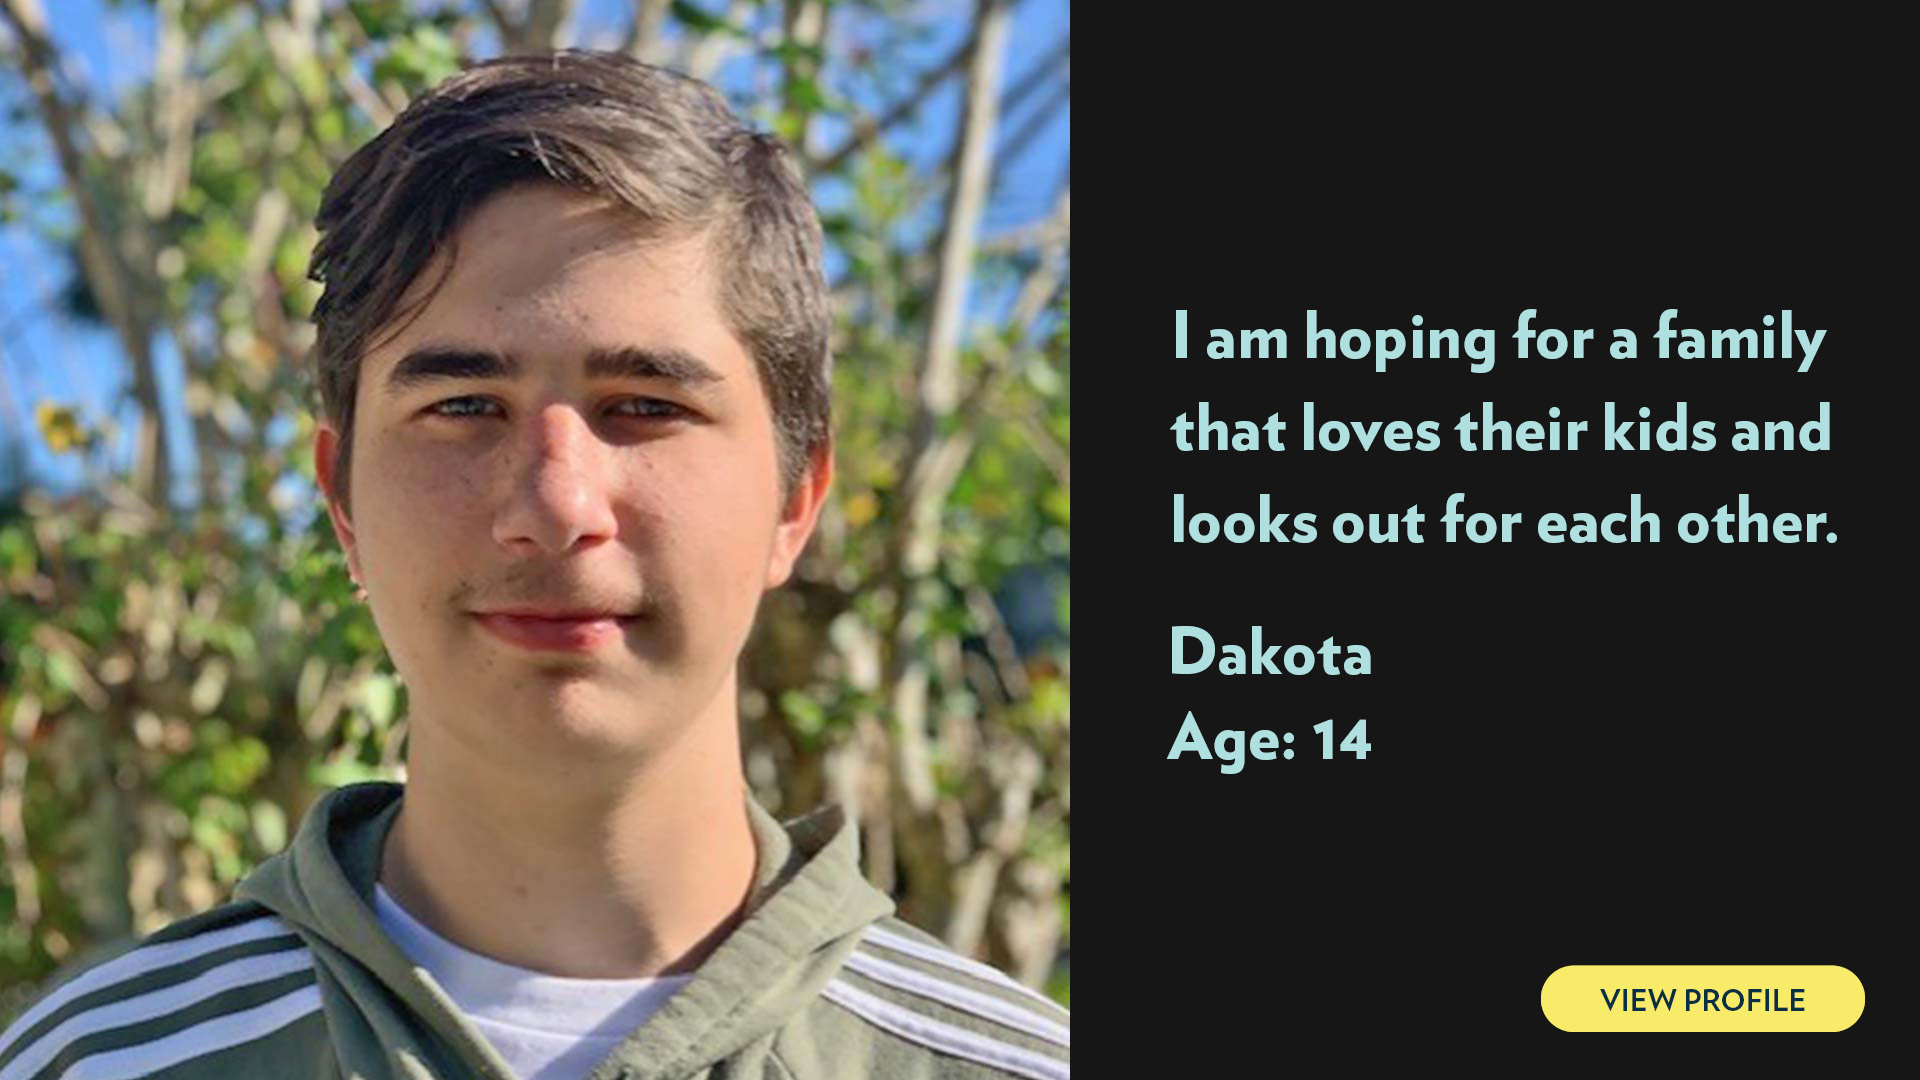 Dakota, age 15. I am hoping for a family that loves their kids and looks out for each other. View profile.